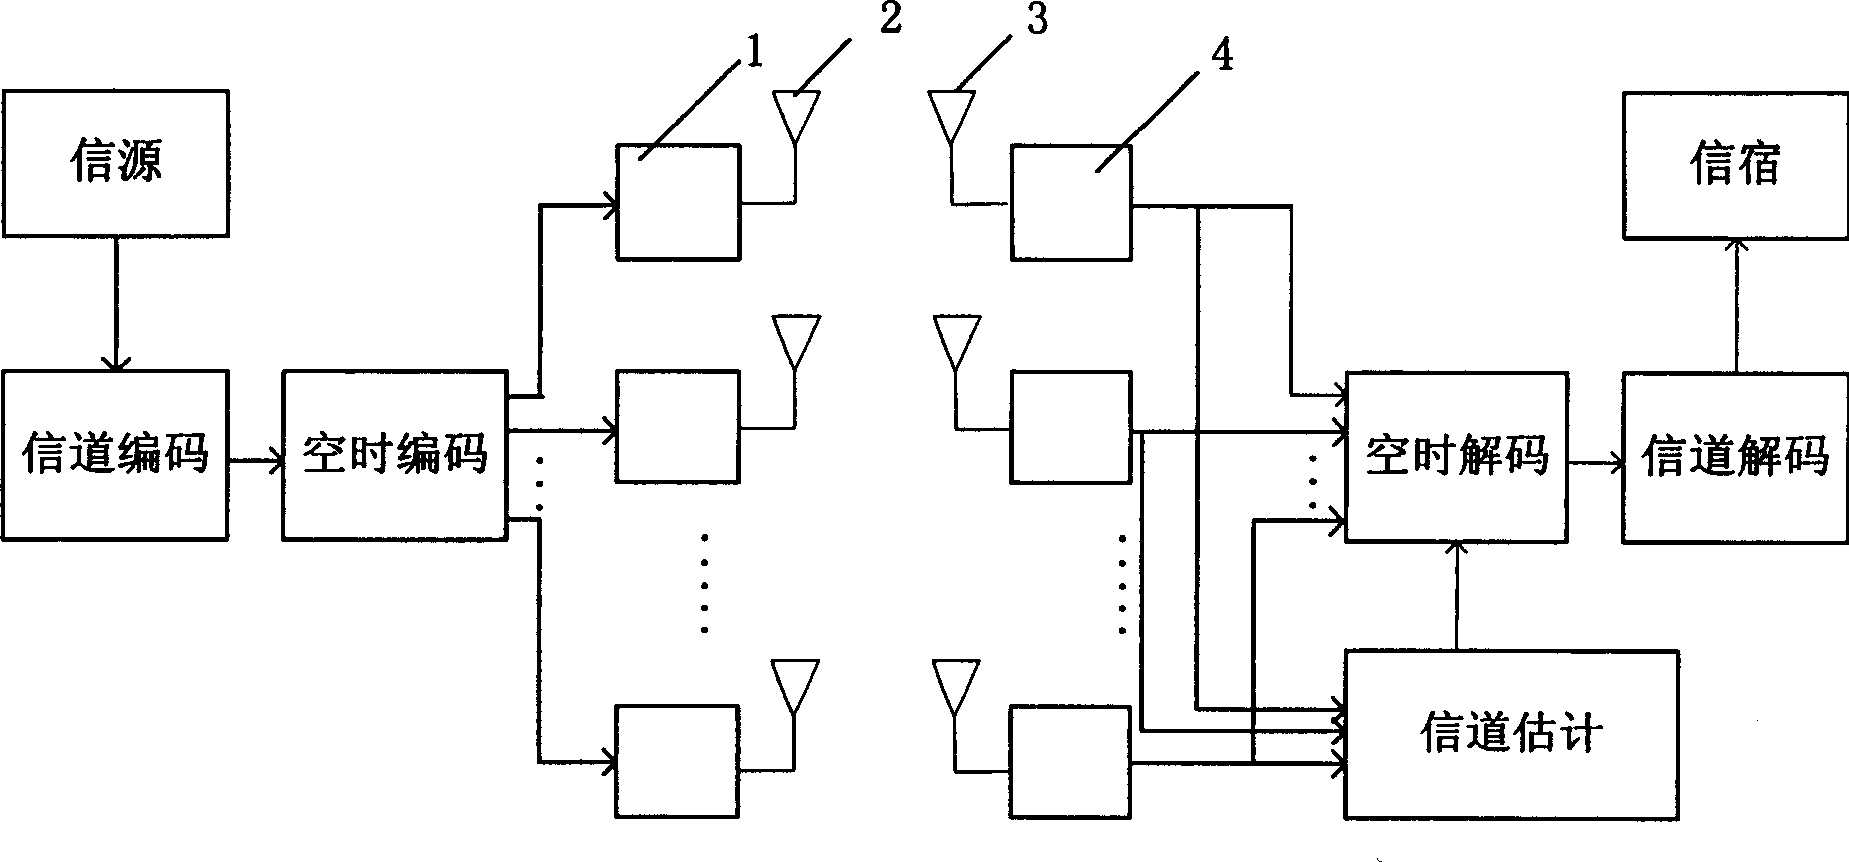 Channel estimating method in MIMO-OFDM system